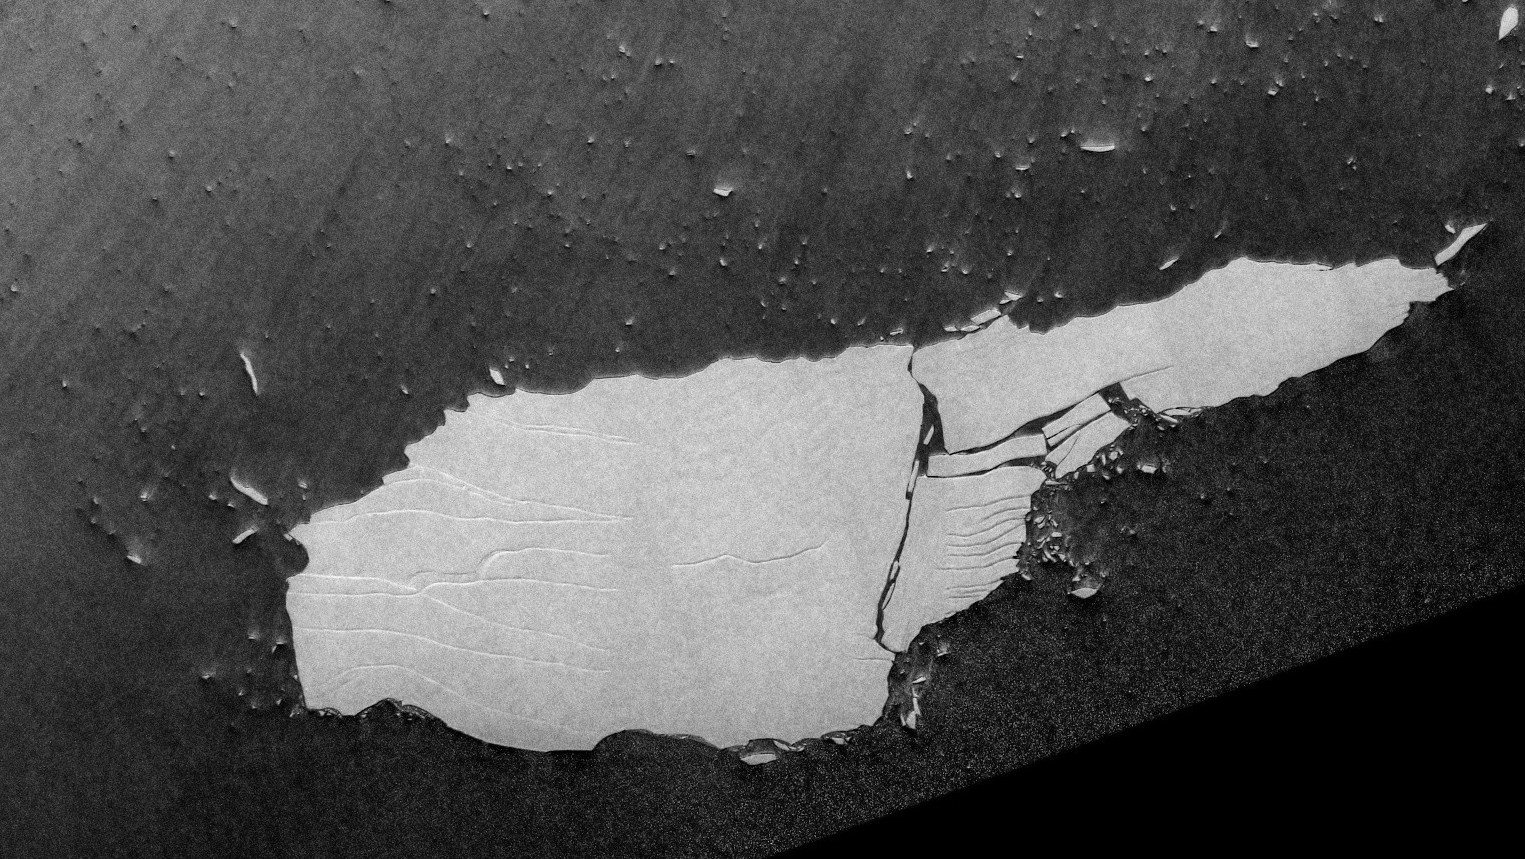 Iceberg A68a, along with new fragments, as spotted by the Sentinel-1 satellite on December 22nd, 2020 21:33 UTC. (Image: Copernicus Sentinel/Sentinel Hub/Pierre Markuse)